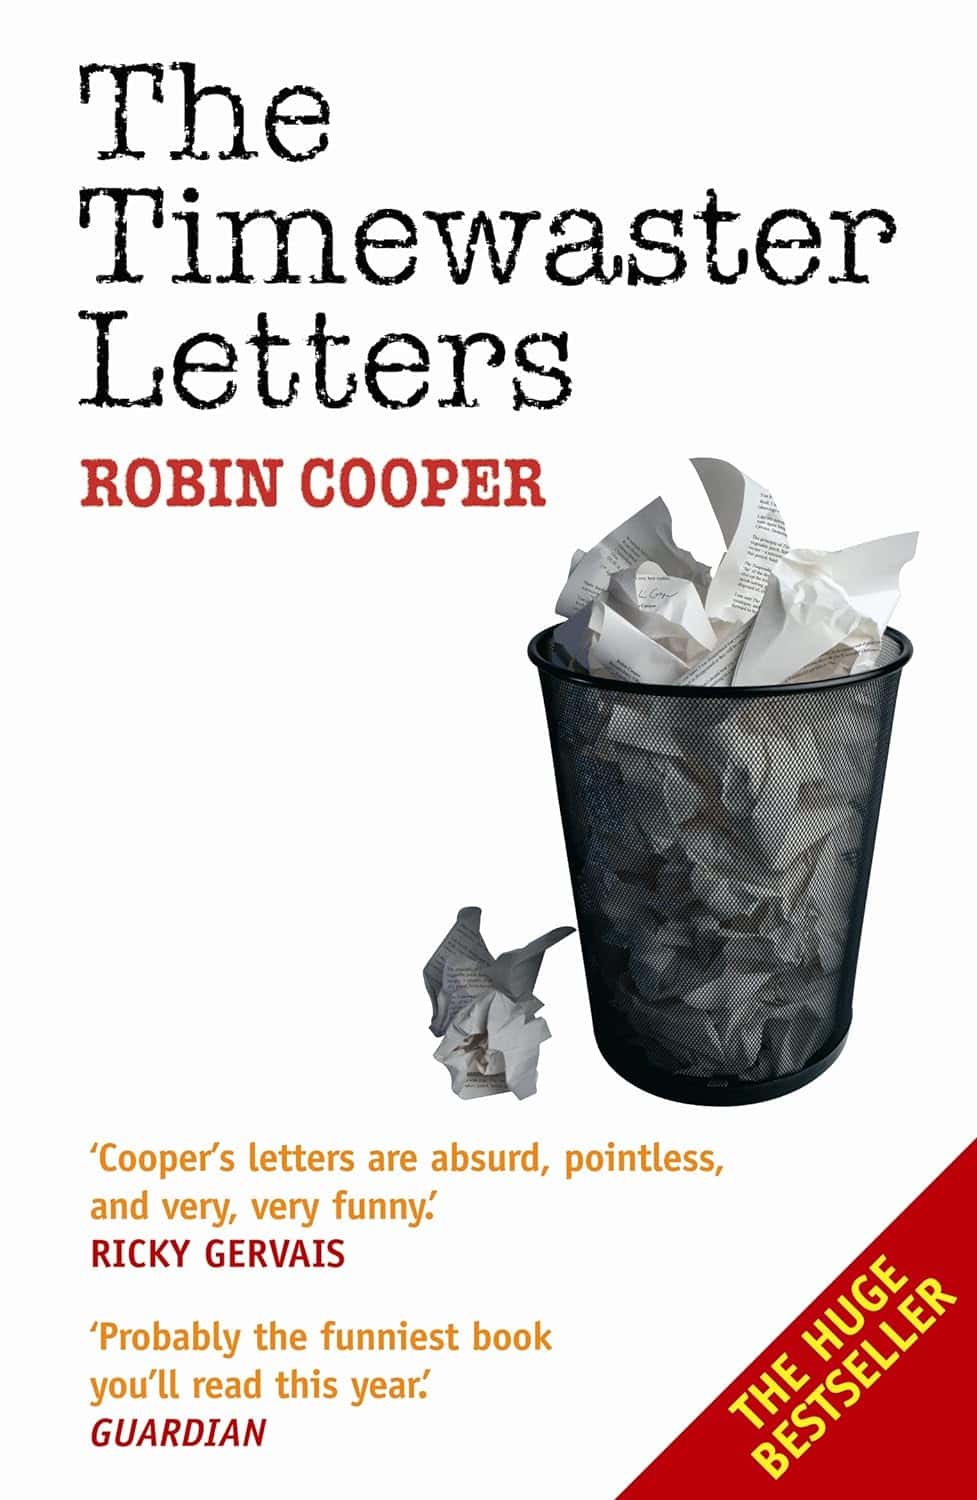 The Timewaster Letters by Robin Cooper (2004)